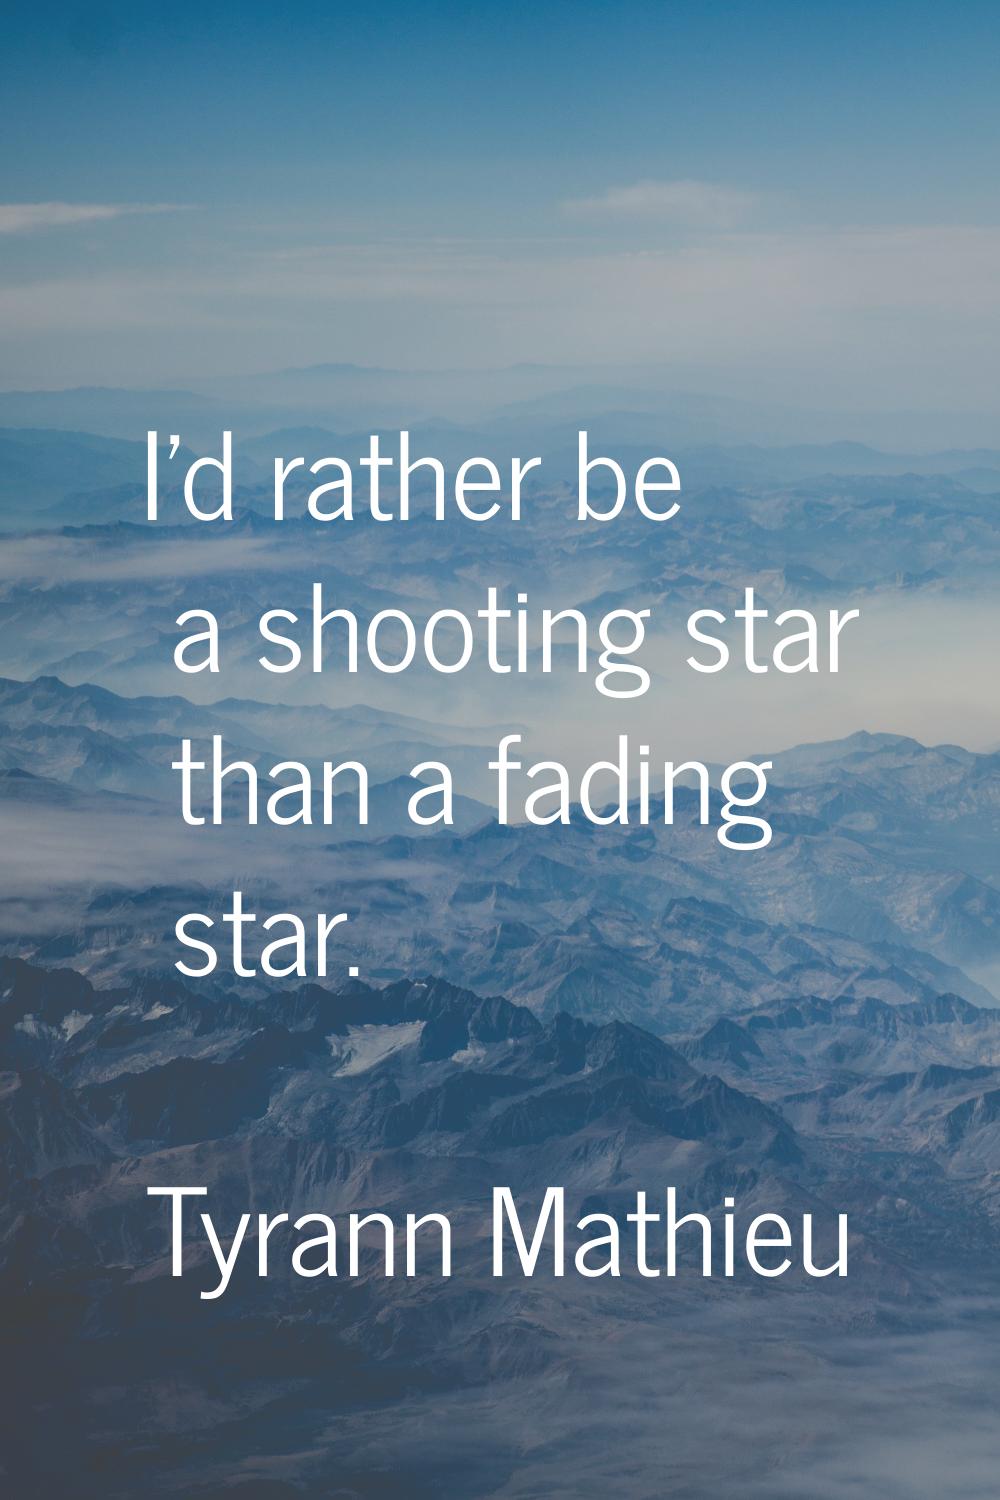 I'd rather be a shooting star than a fading star.